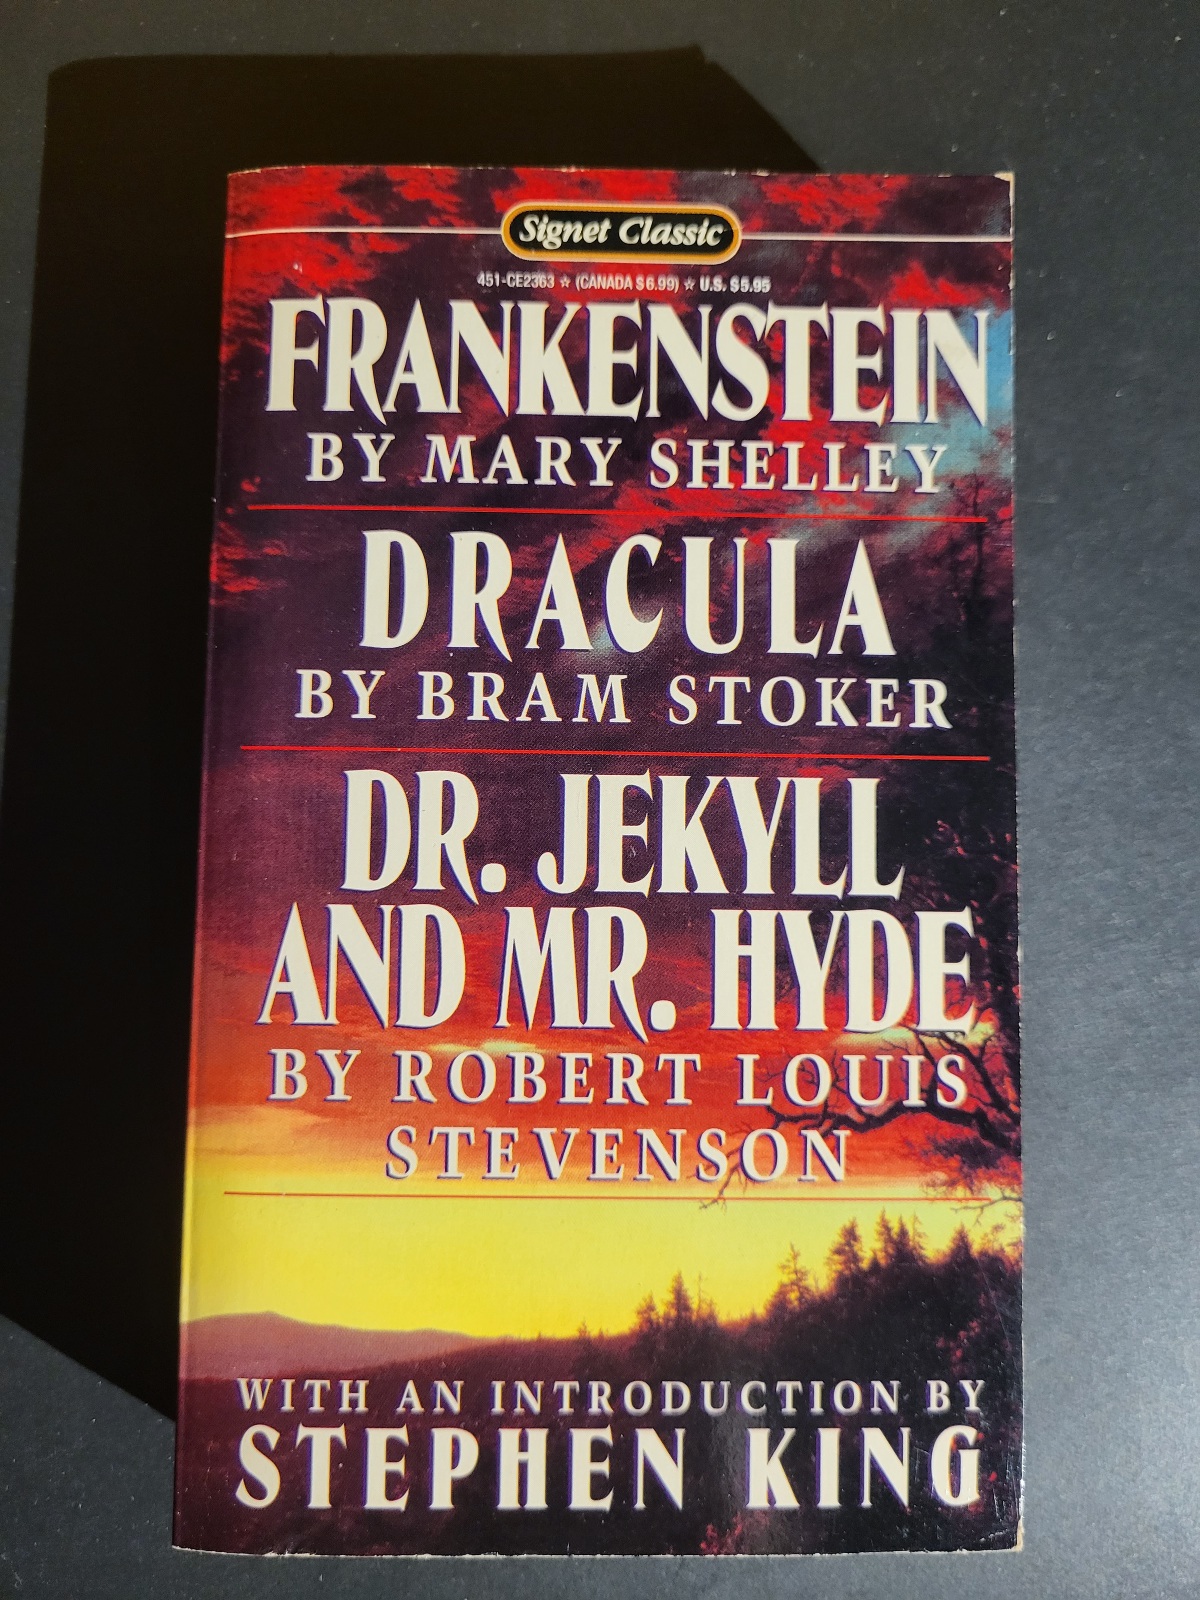 Frankenstein / Dracula / Dr. Jekyll and Mr. Hyde Signet Classics Intro by Stephen King